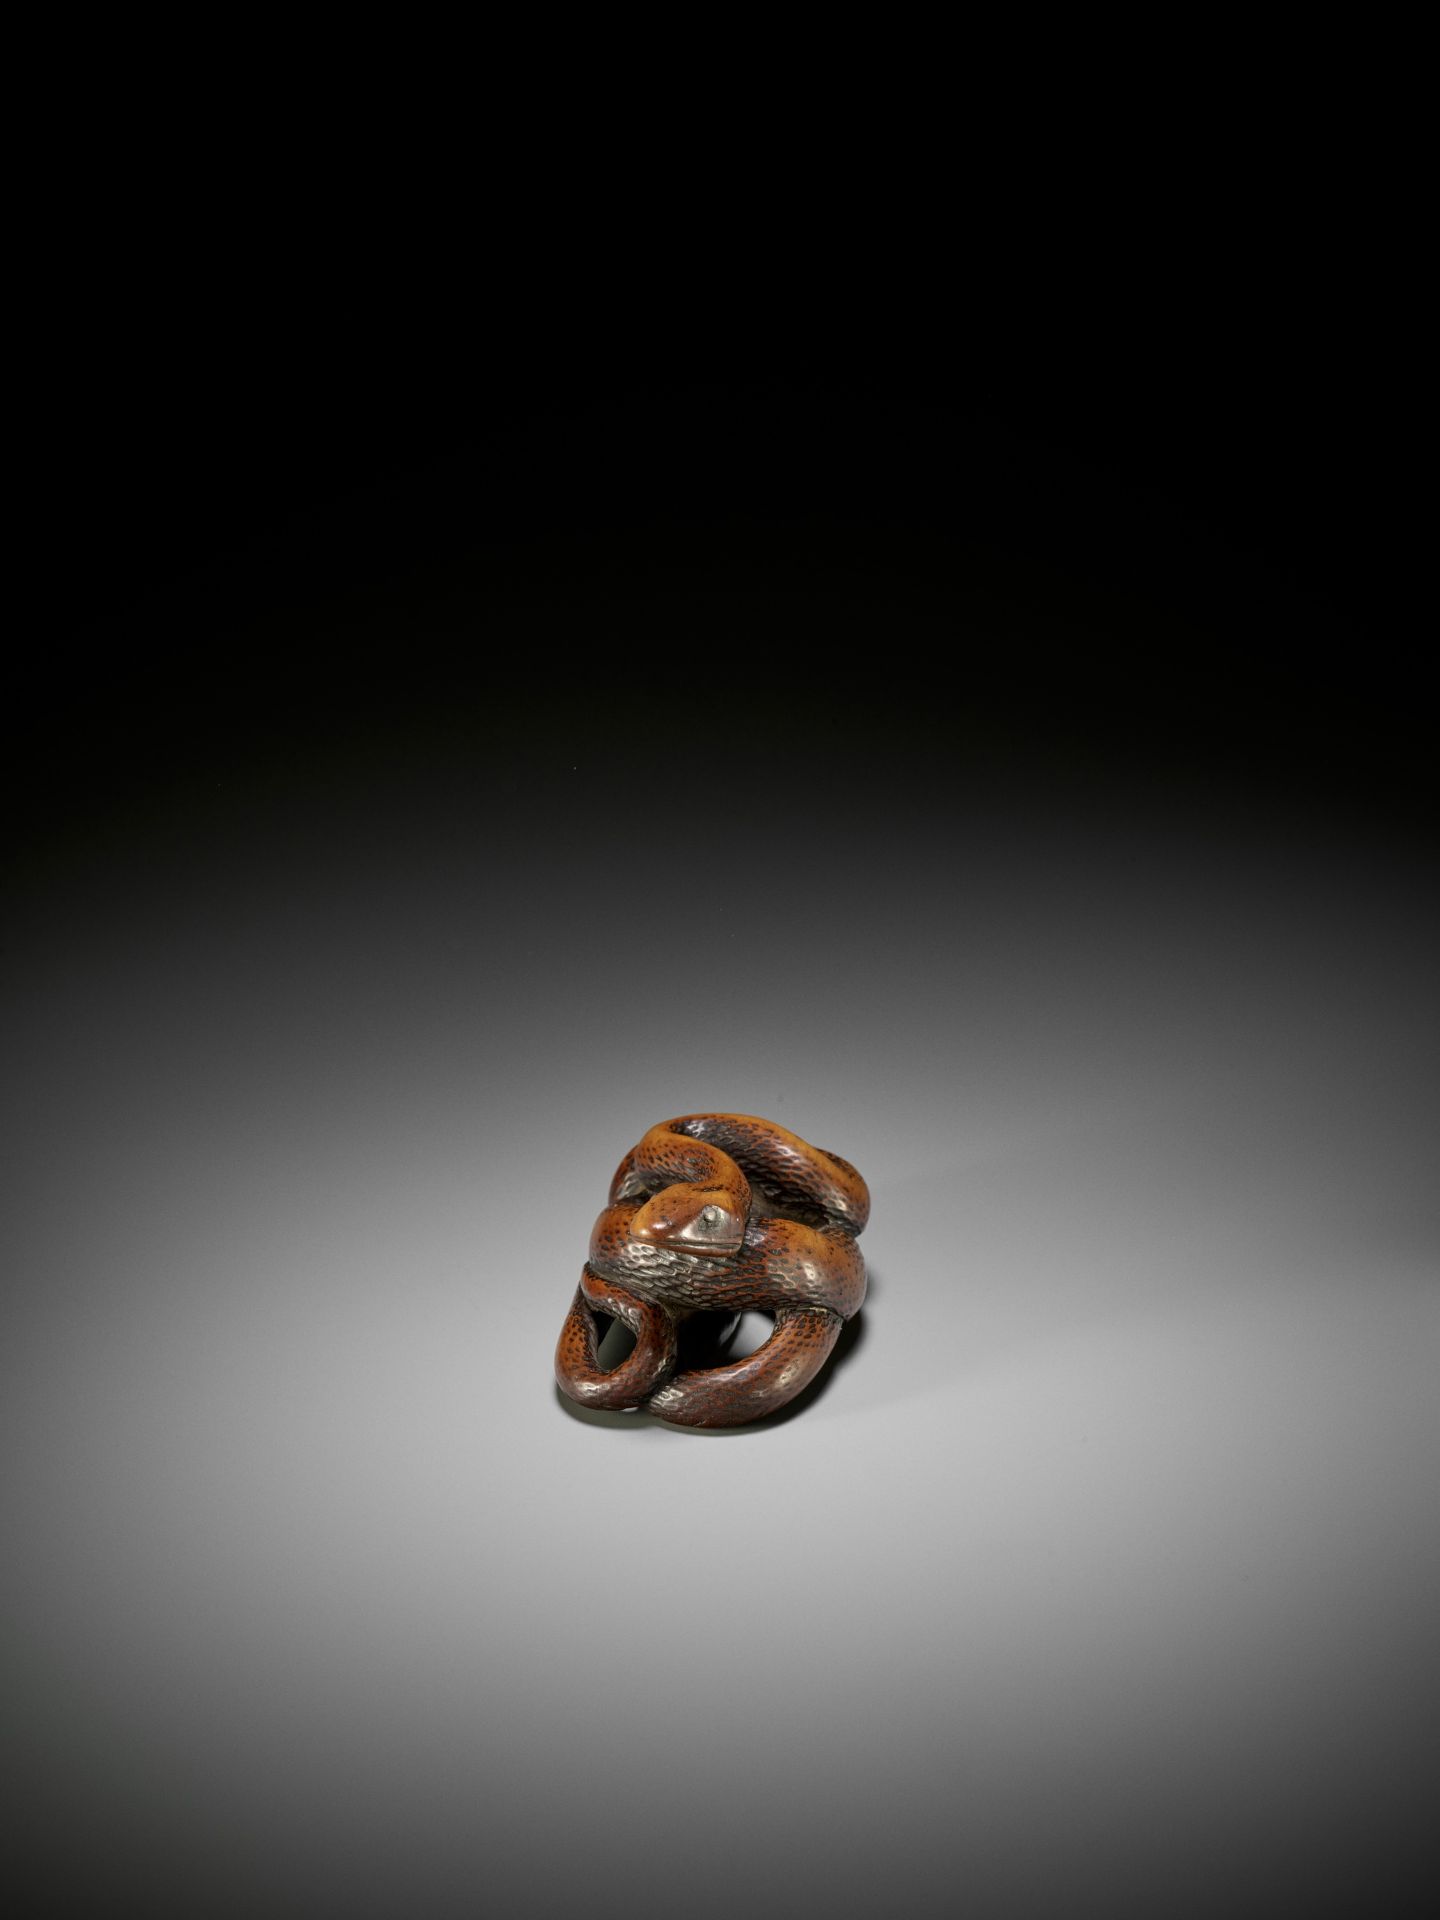 A LARGE AND POWERFUL WOOD NETSUKE OF A COILED SNAKE - Image 6 of 10